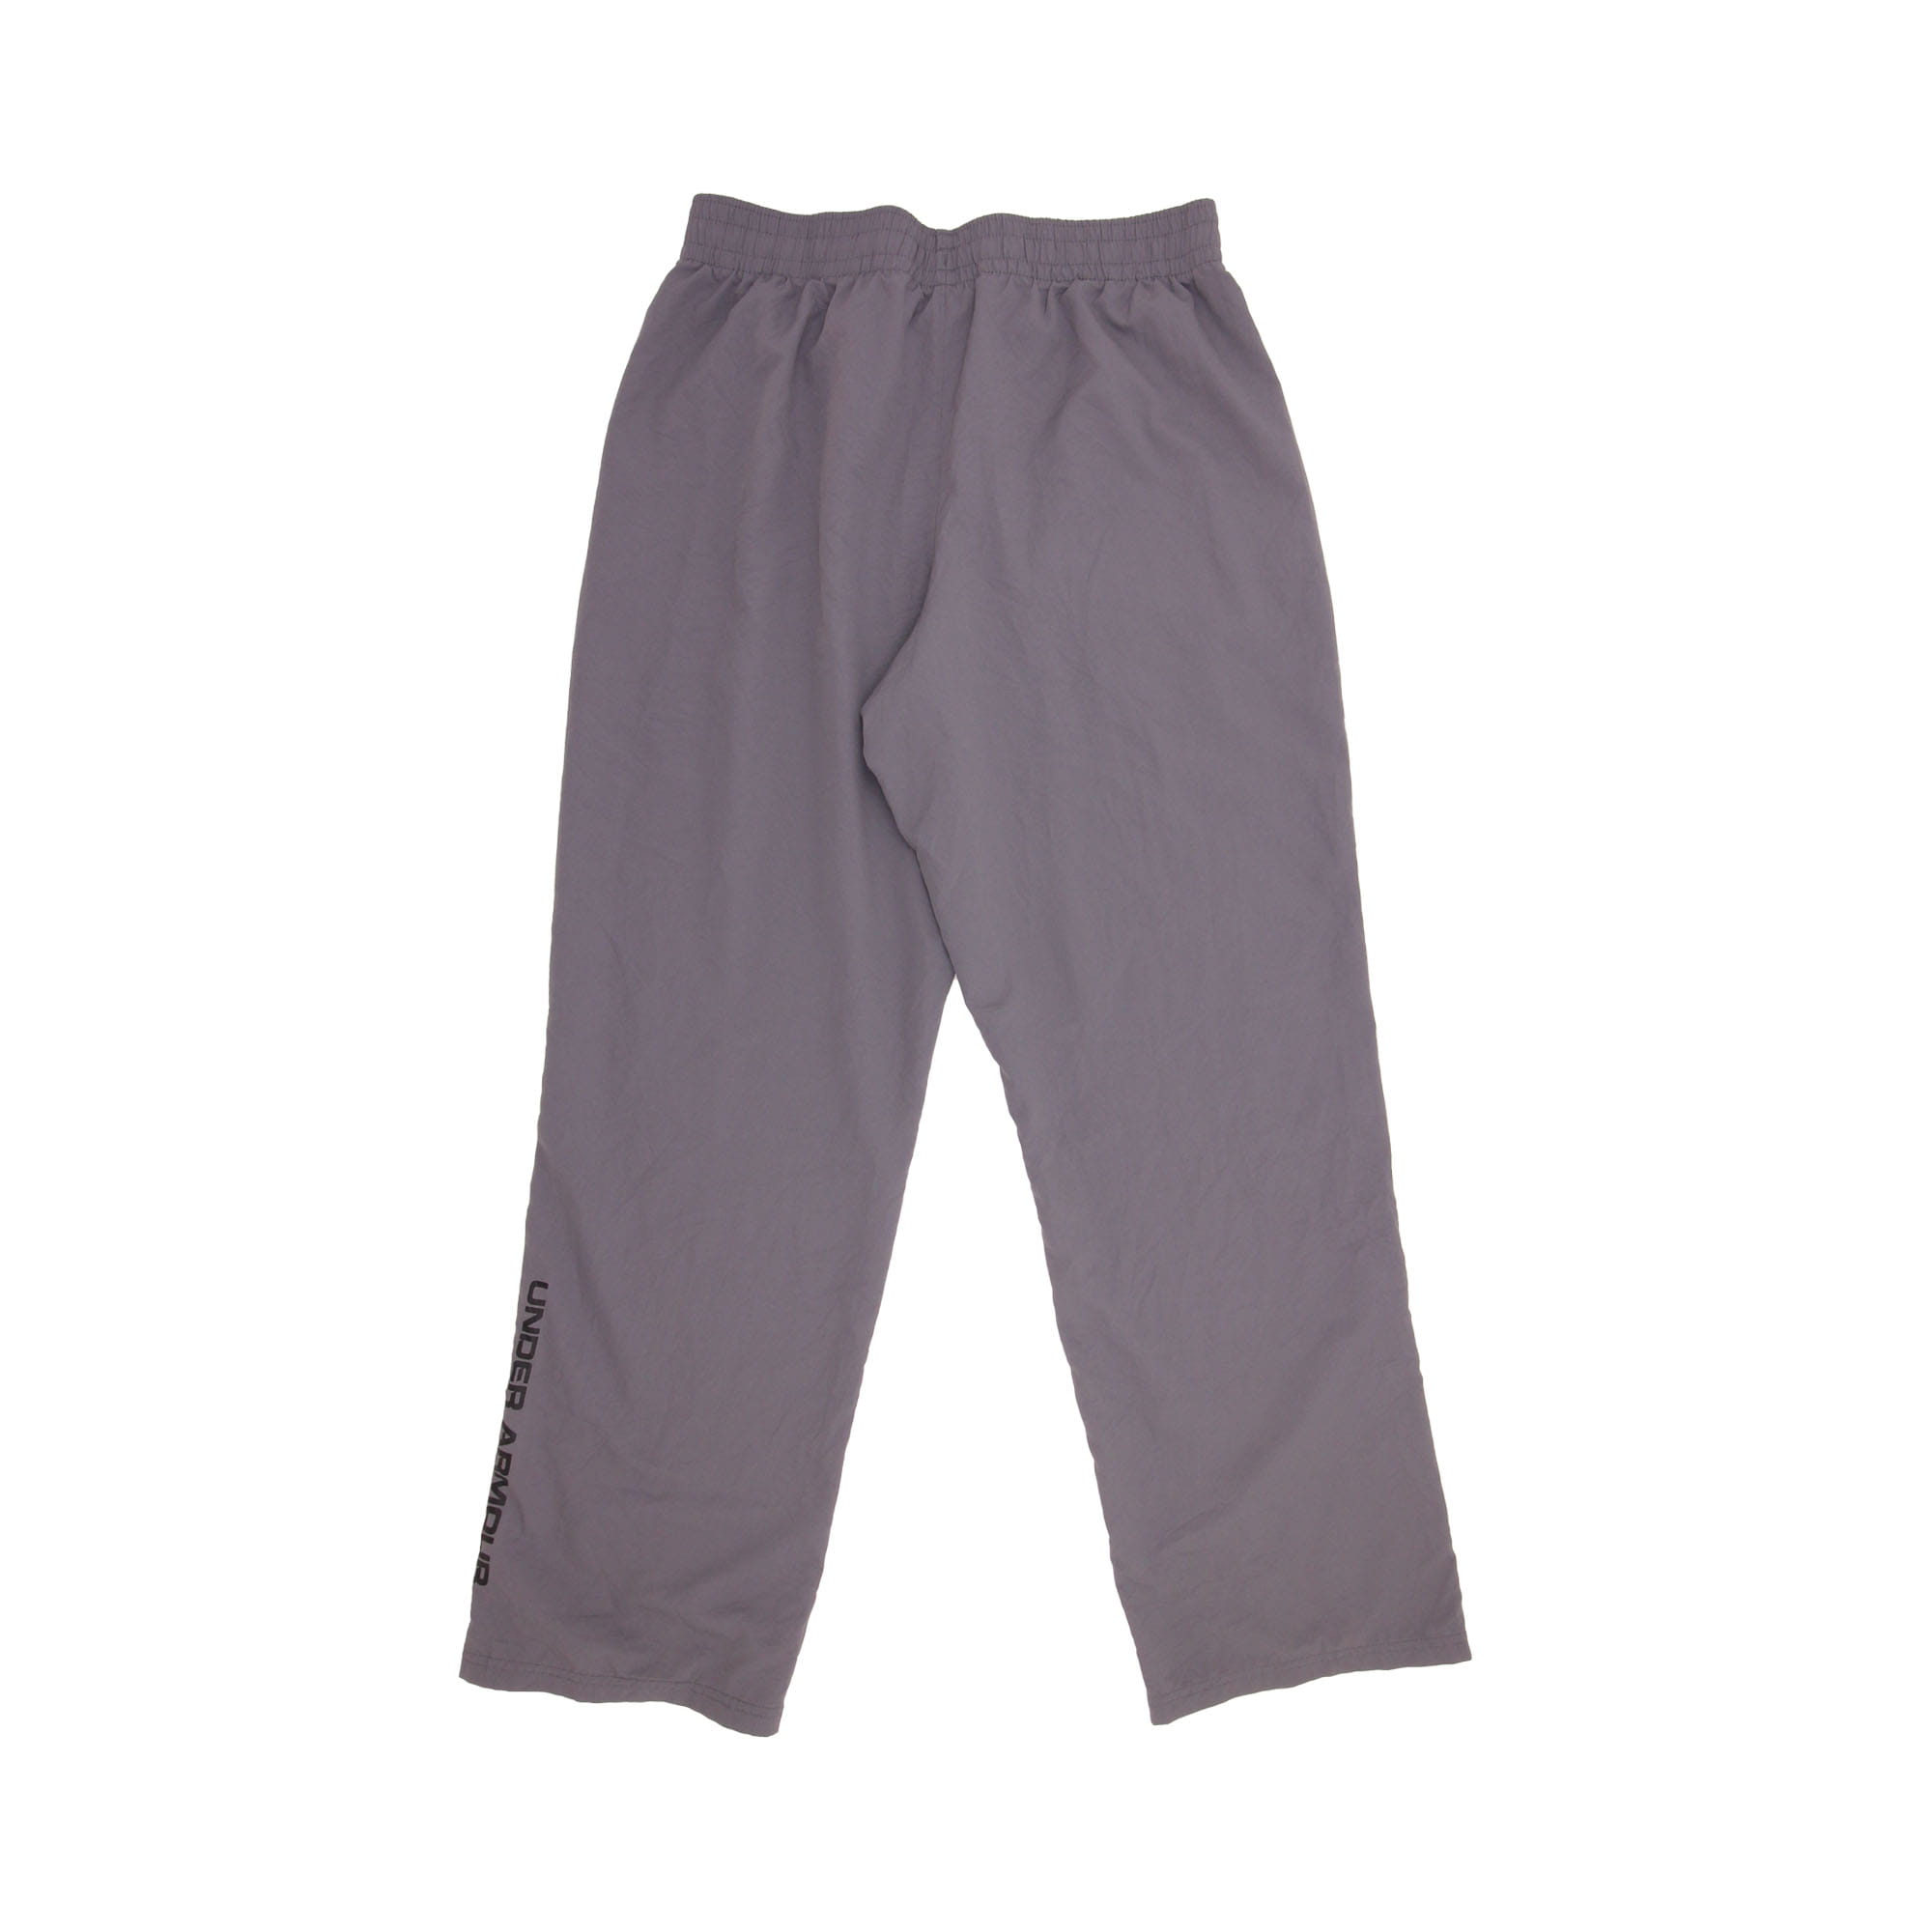 Under Armour Track Pants Grey -  L